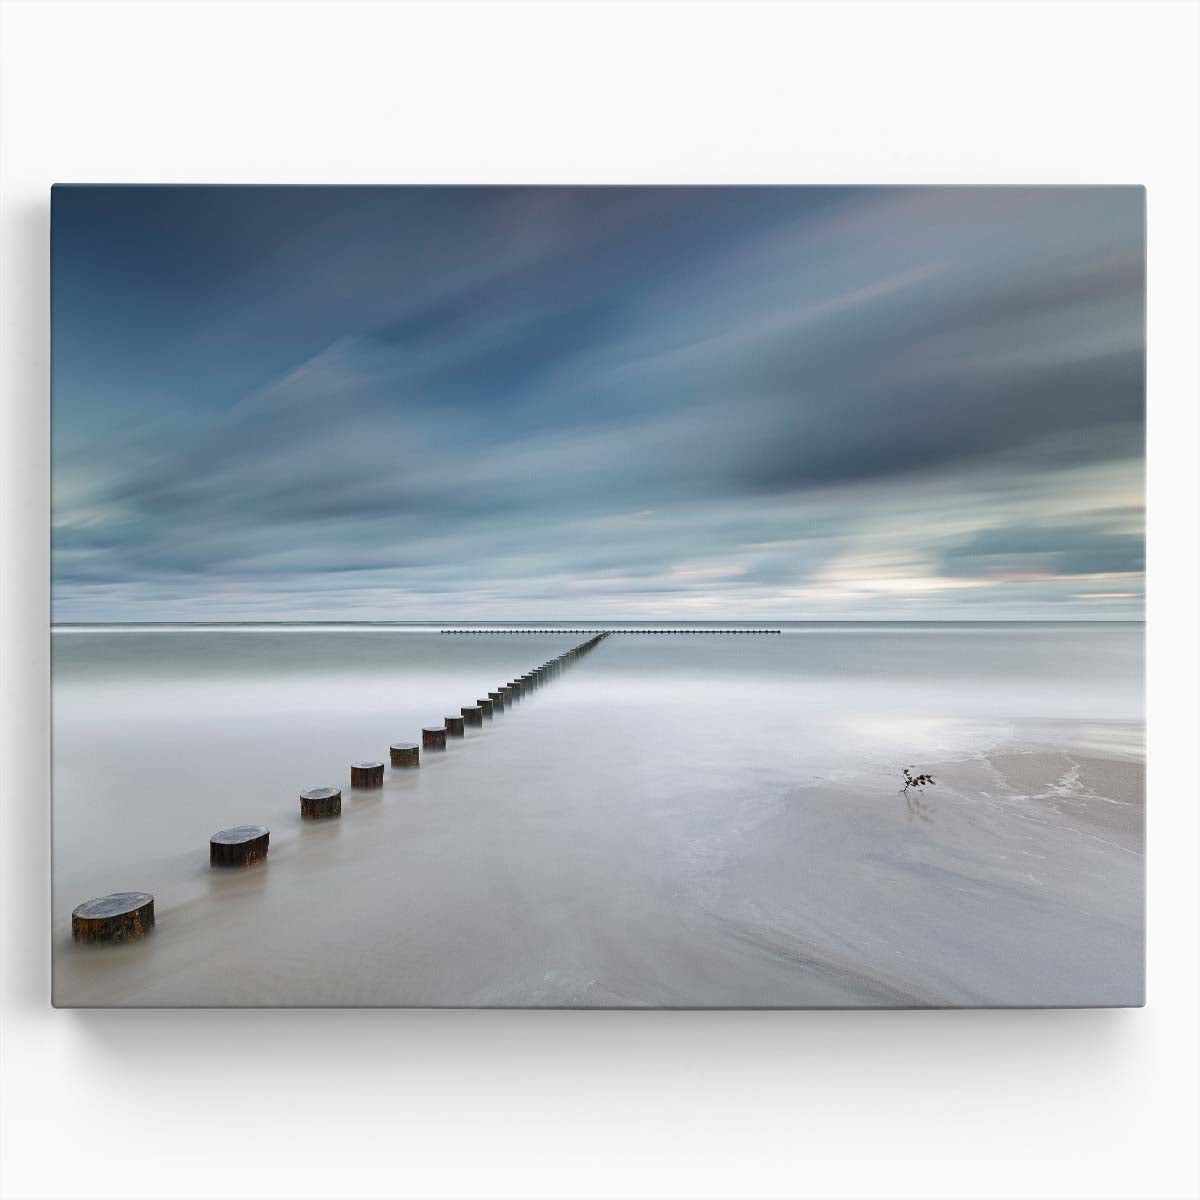 Serene Baltic Seascape Dawn at Jarosławiec Shoreline Photography Wall Art by Luxuriance Designs. Made in USA.